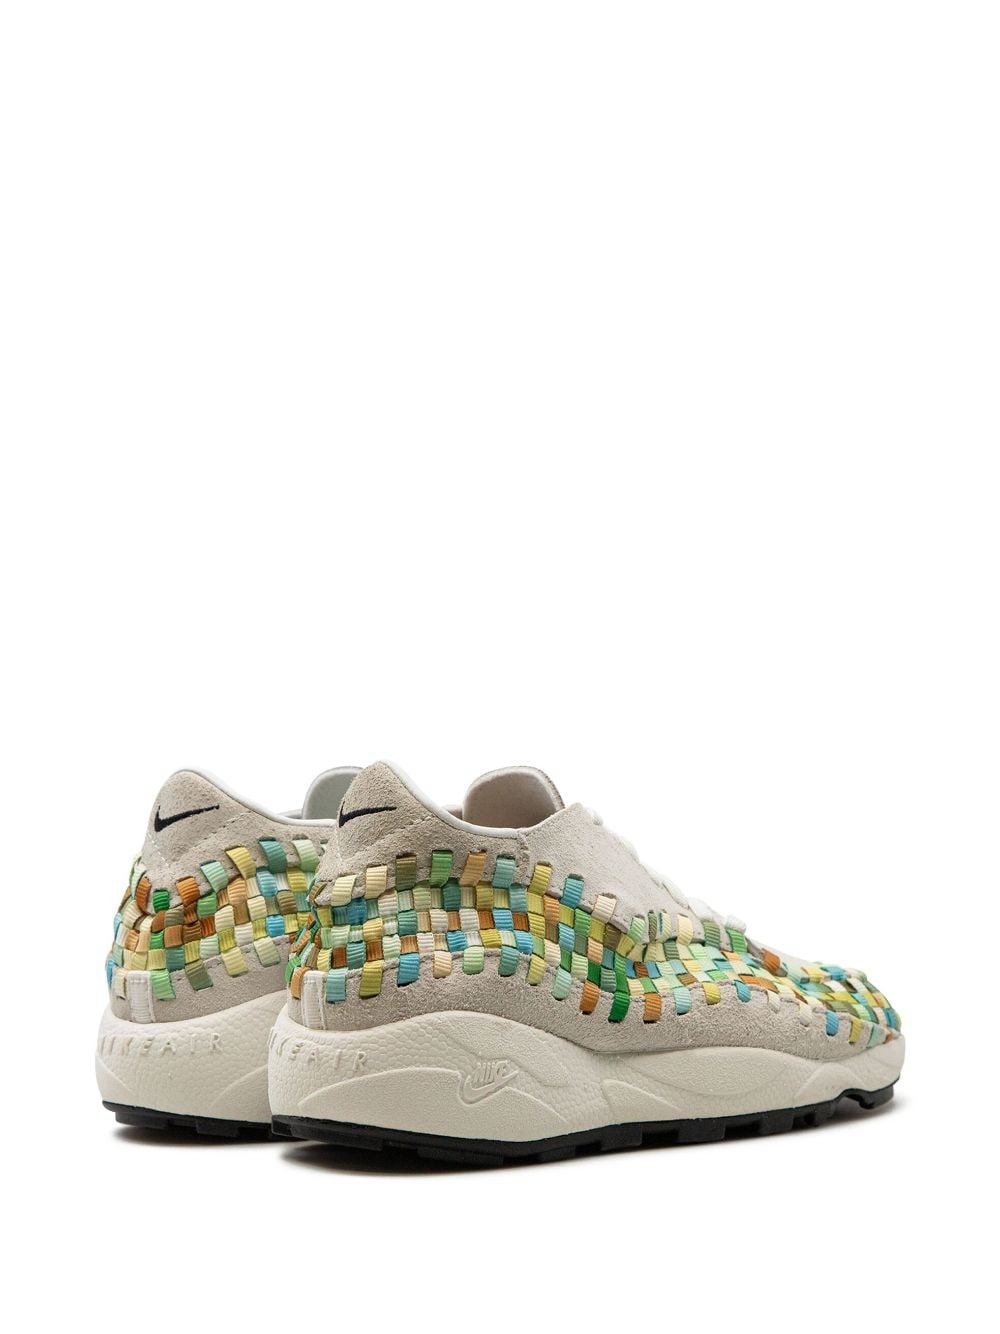 Air Footscape Woven "Rainbow" sneakers - 3